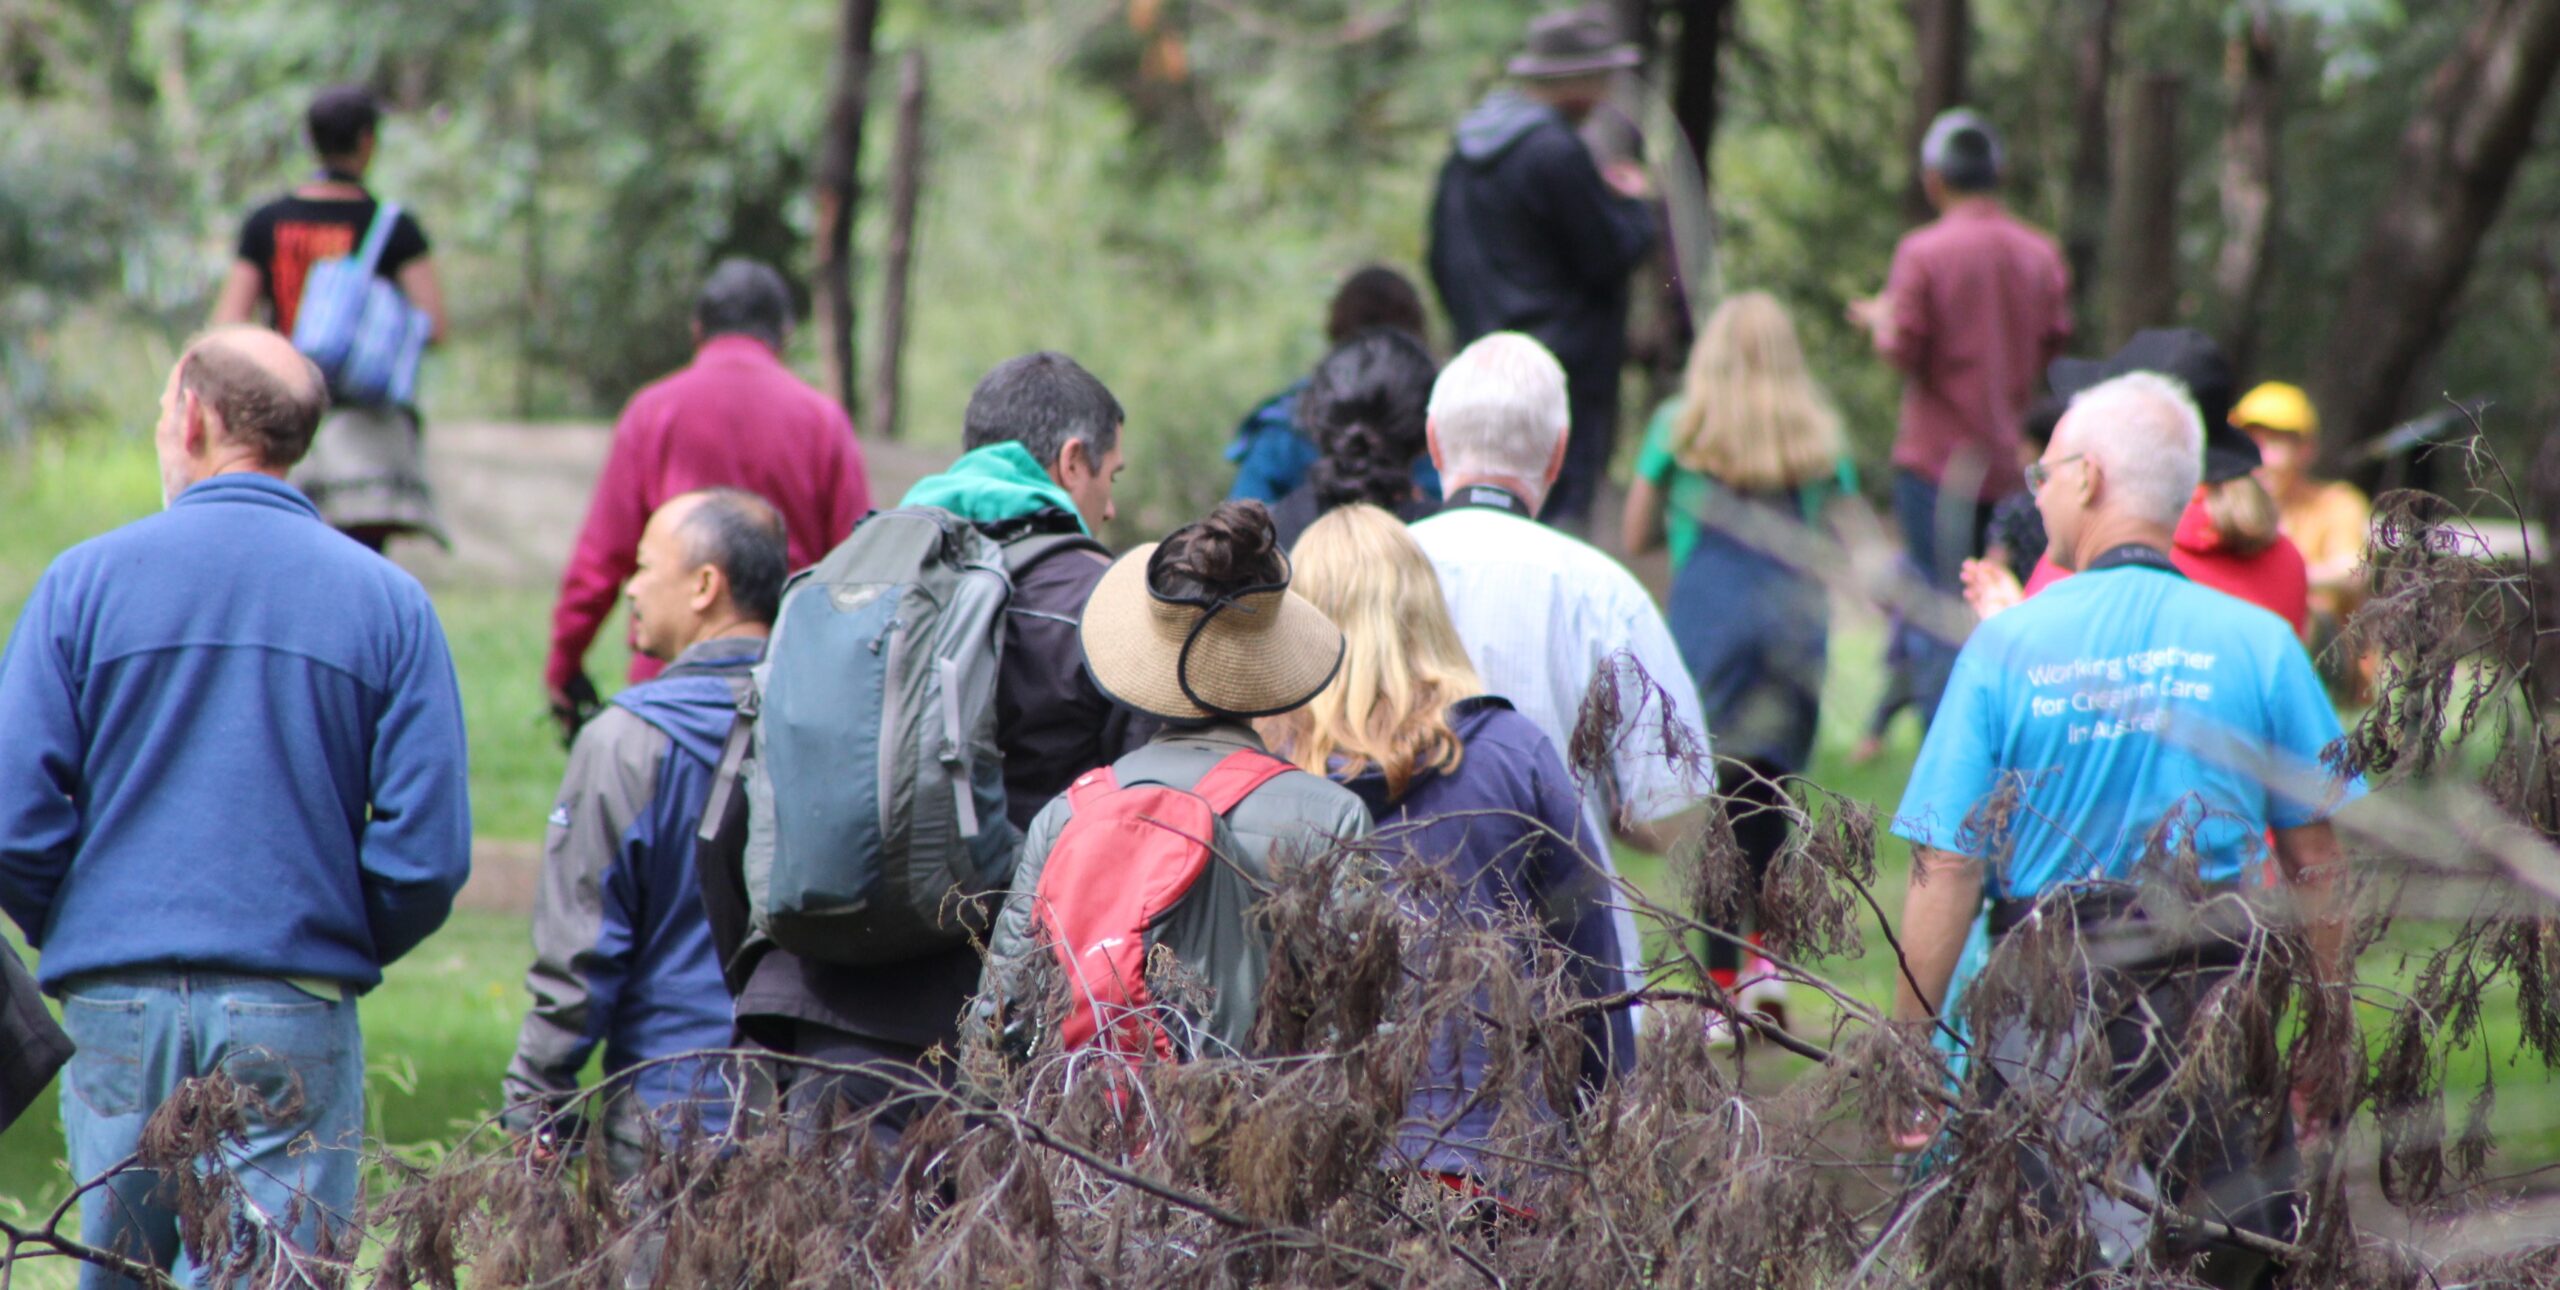 A crowd of people walking through the bushland at the Yea wetlands event.